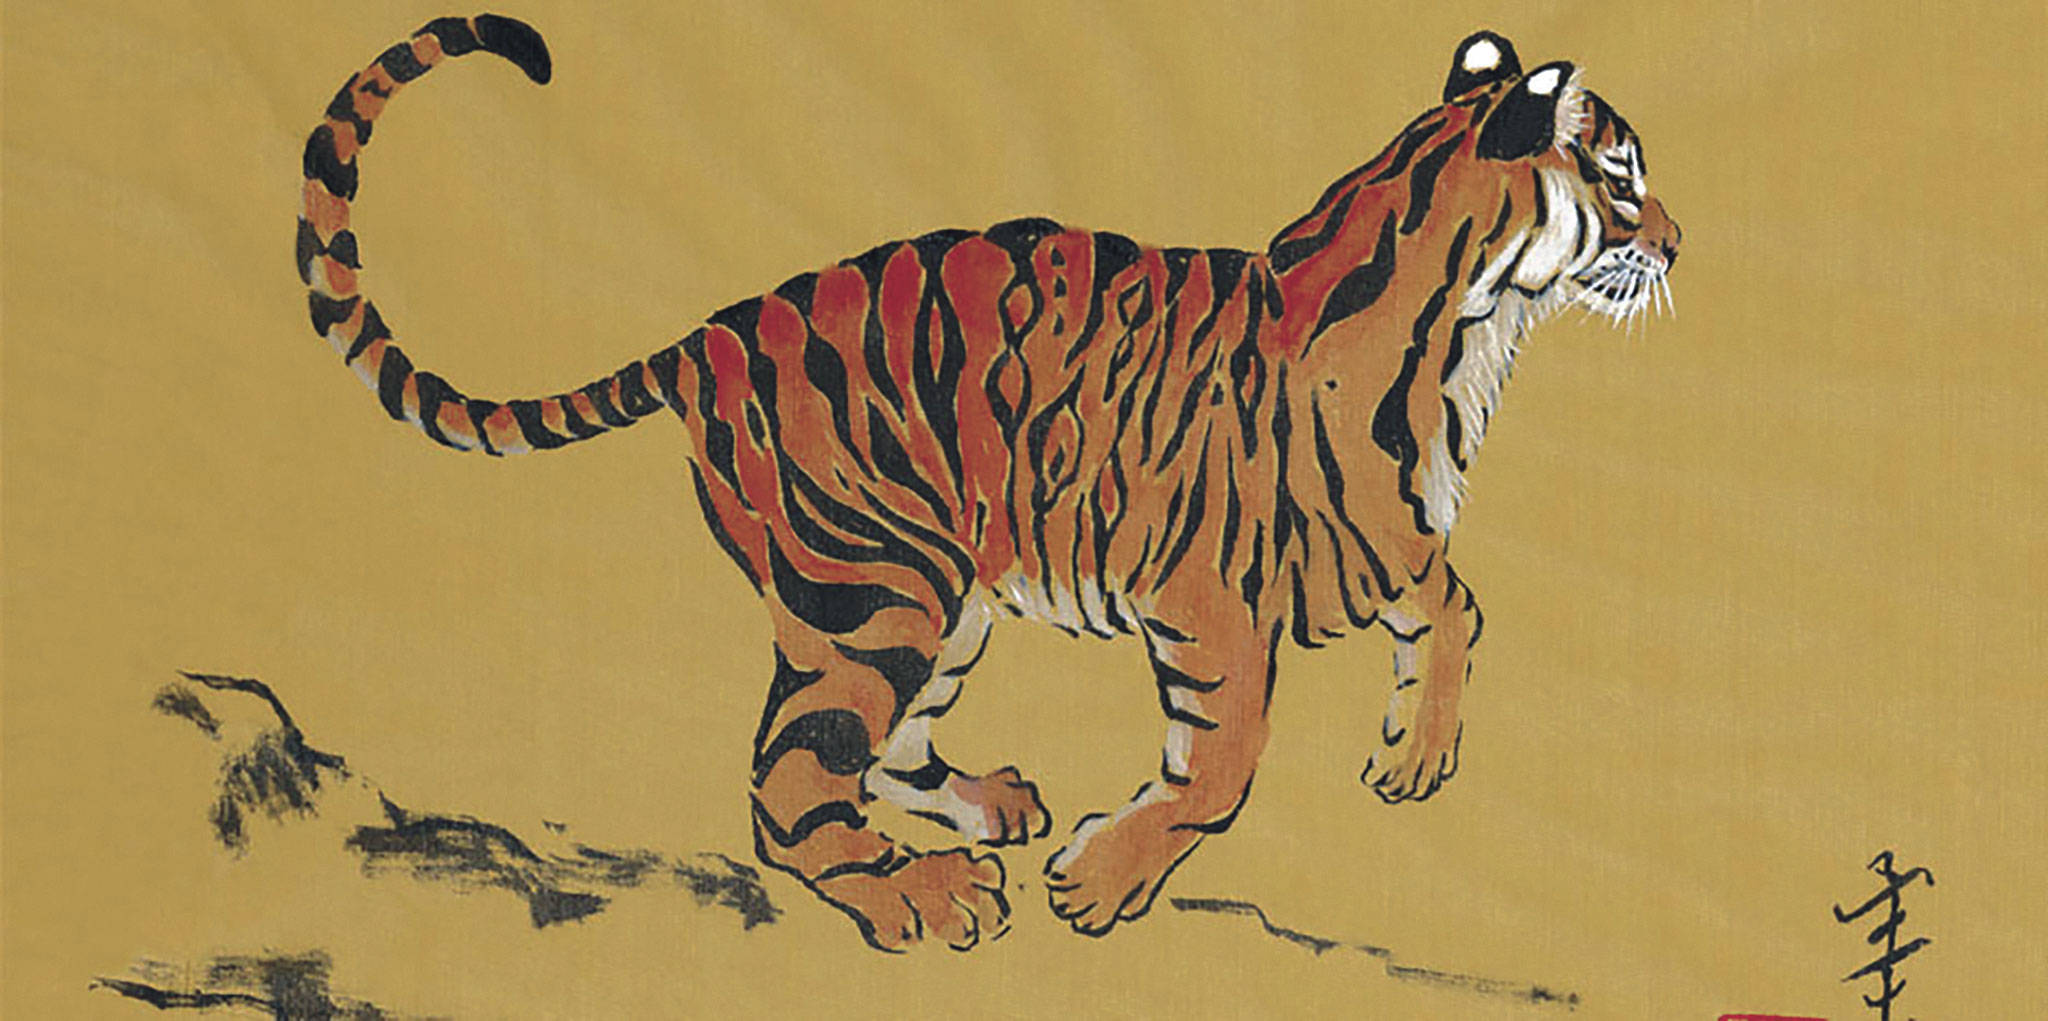 “Tiger” by Roxanne Grinstad was painted in the Japanese brush style.